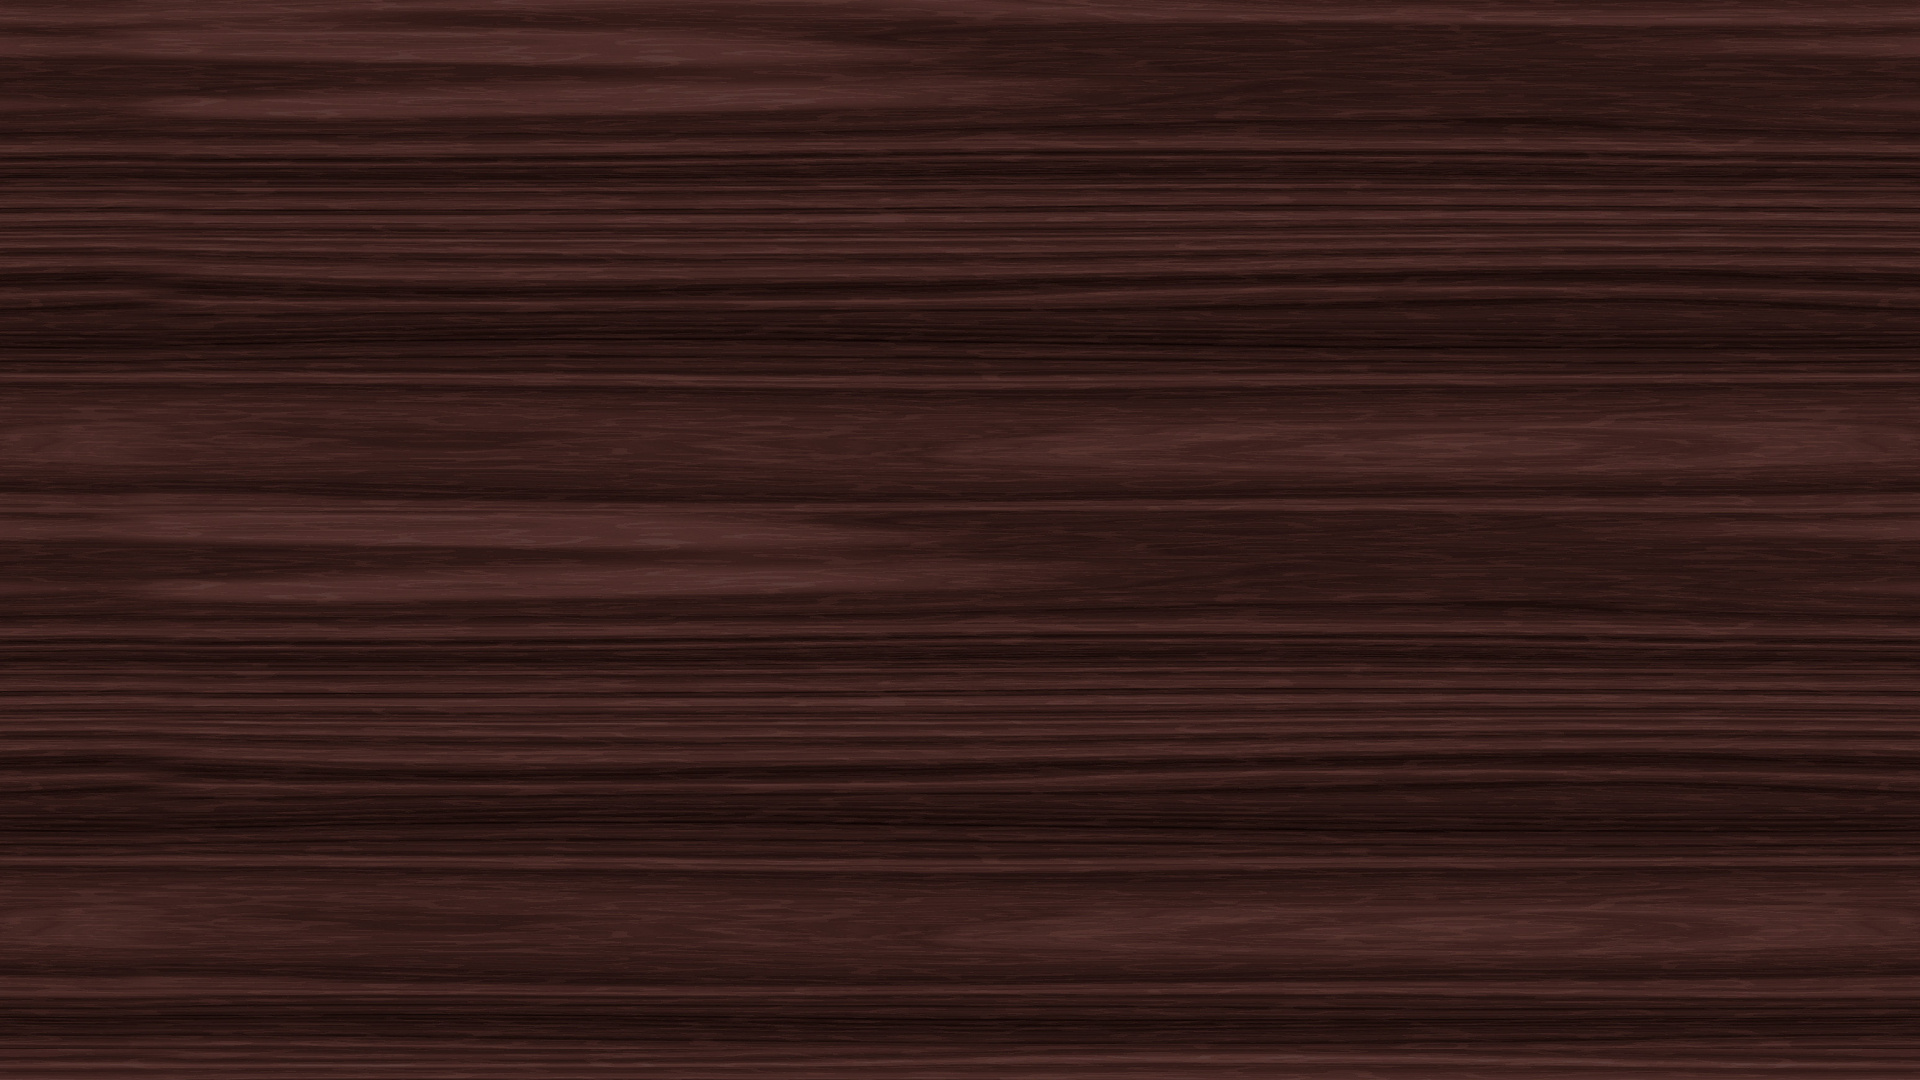 Red and Black Striped Textile. Wallpaper in 1920x1080 Resolution